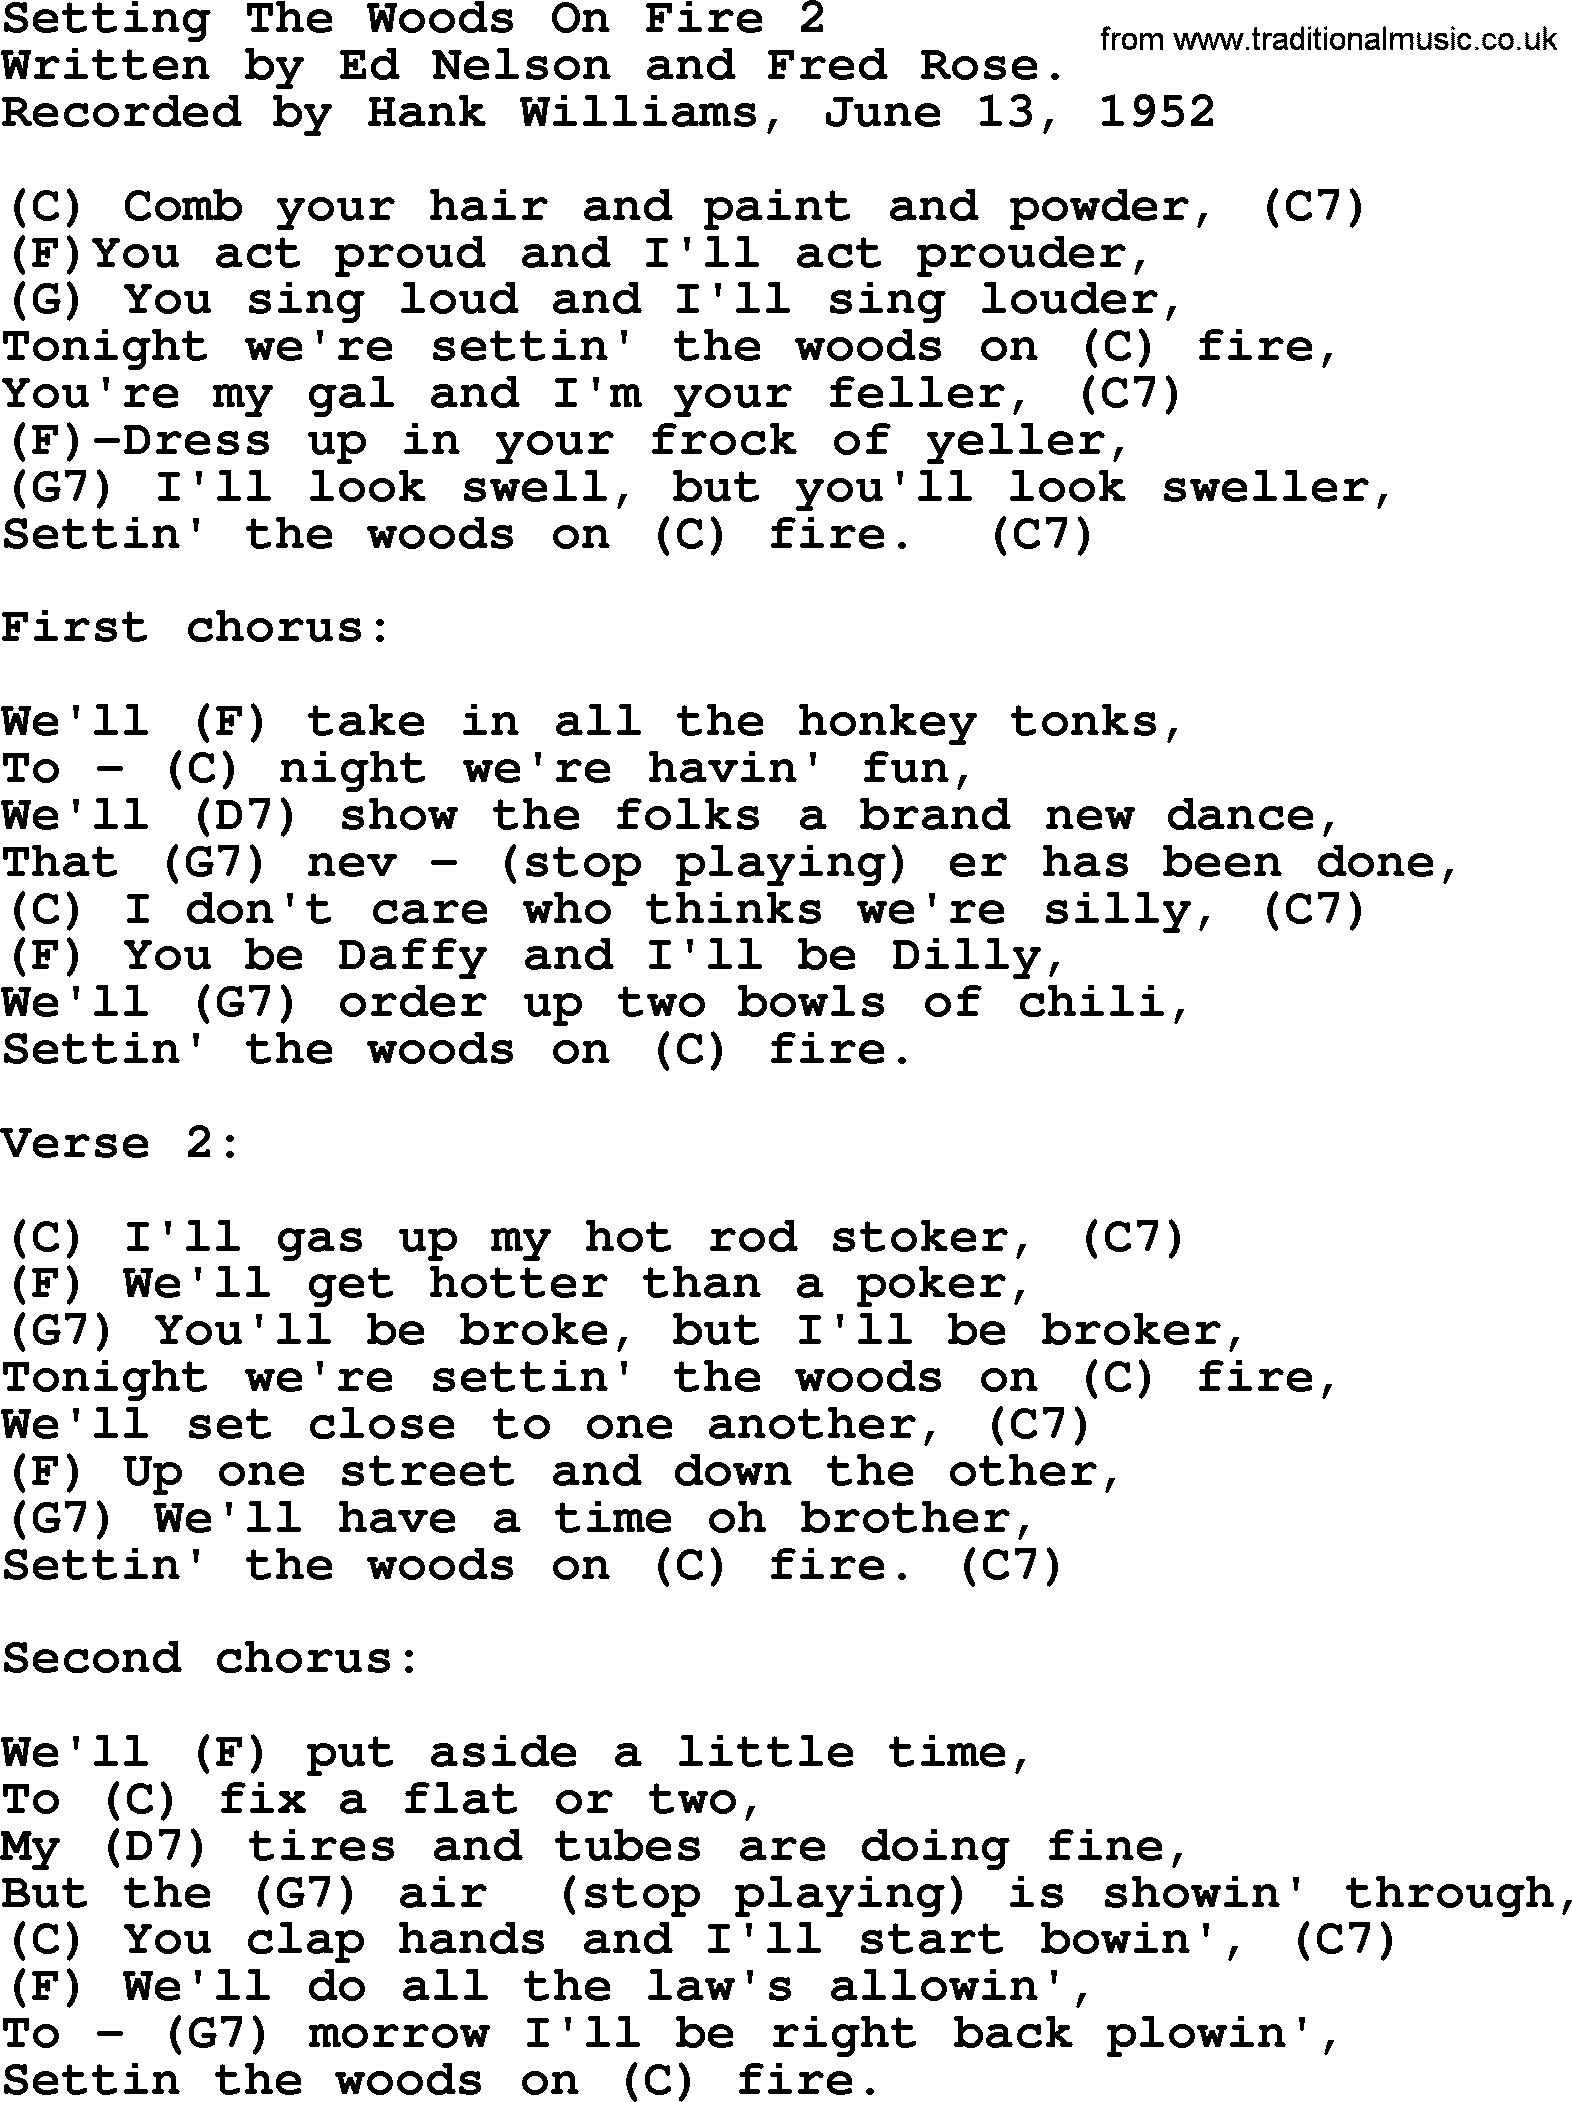 Hank Williams song Setting The Woods On Fire2, lyrics and chords